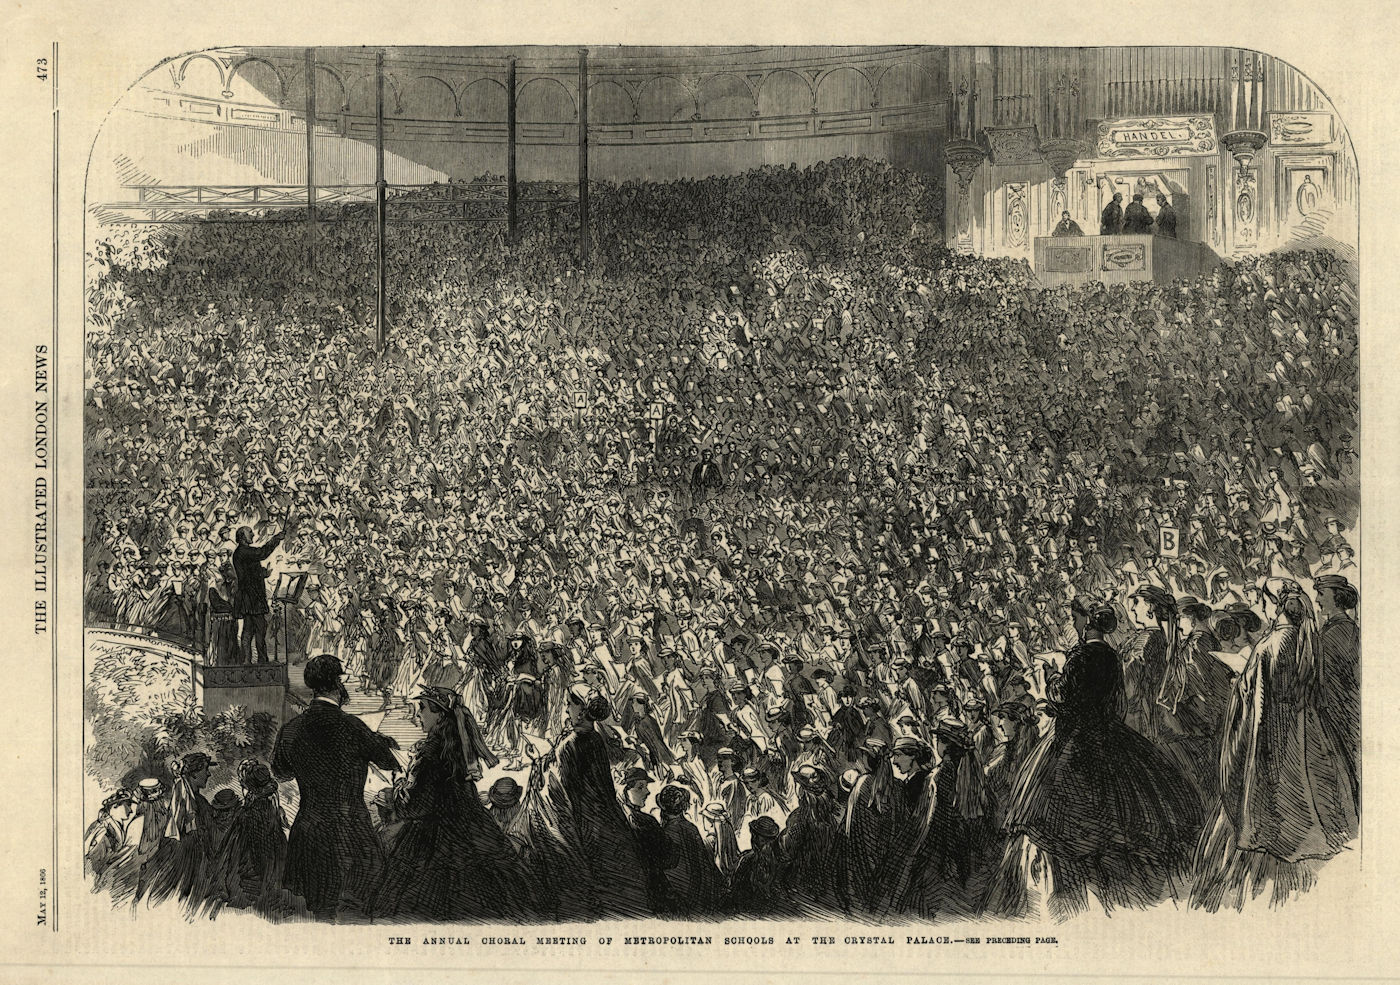 Associate Product Choral meeting of metropolitan schools at the Crystal Palace. London 1866